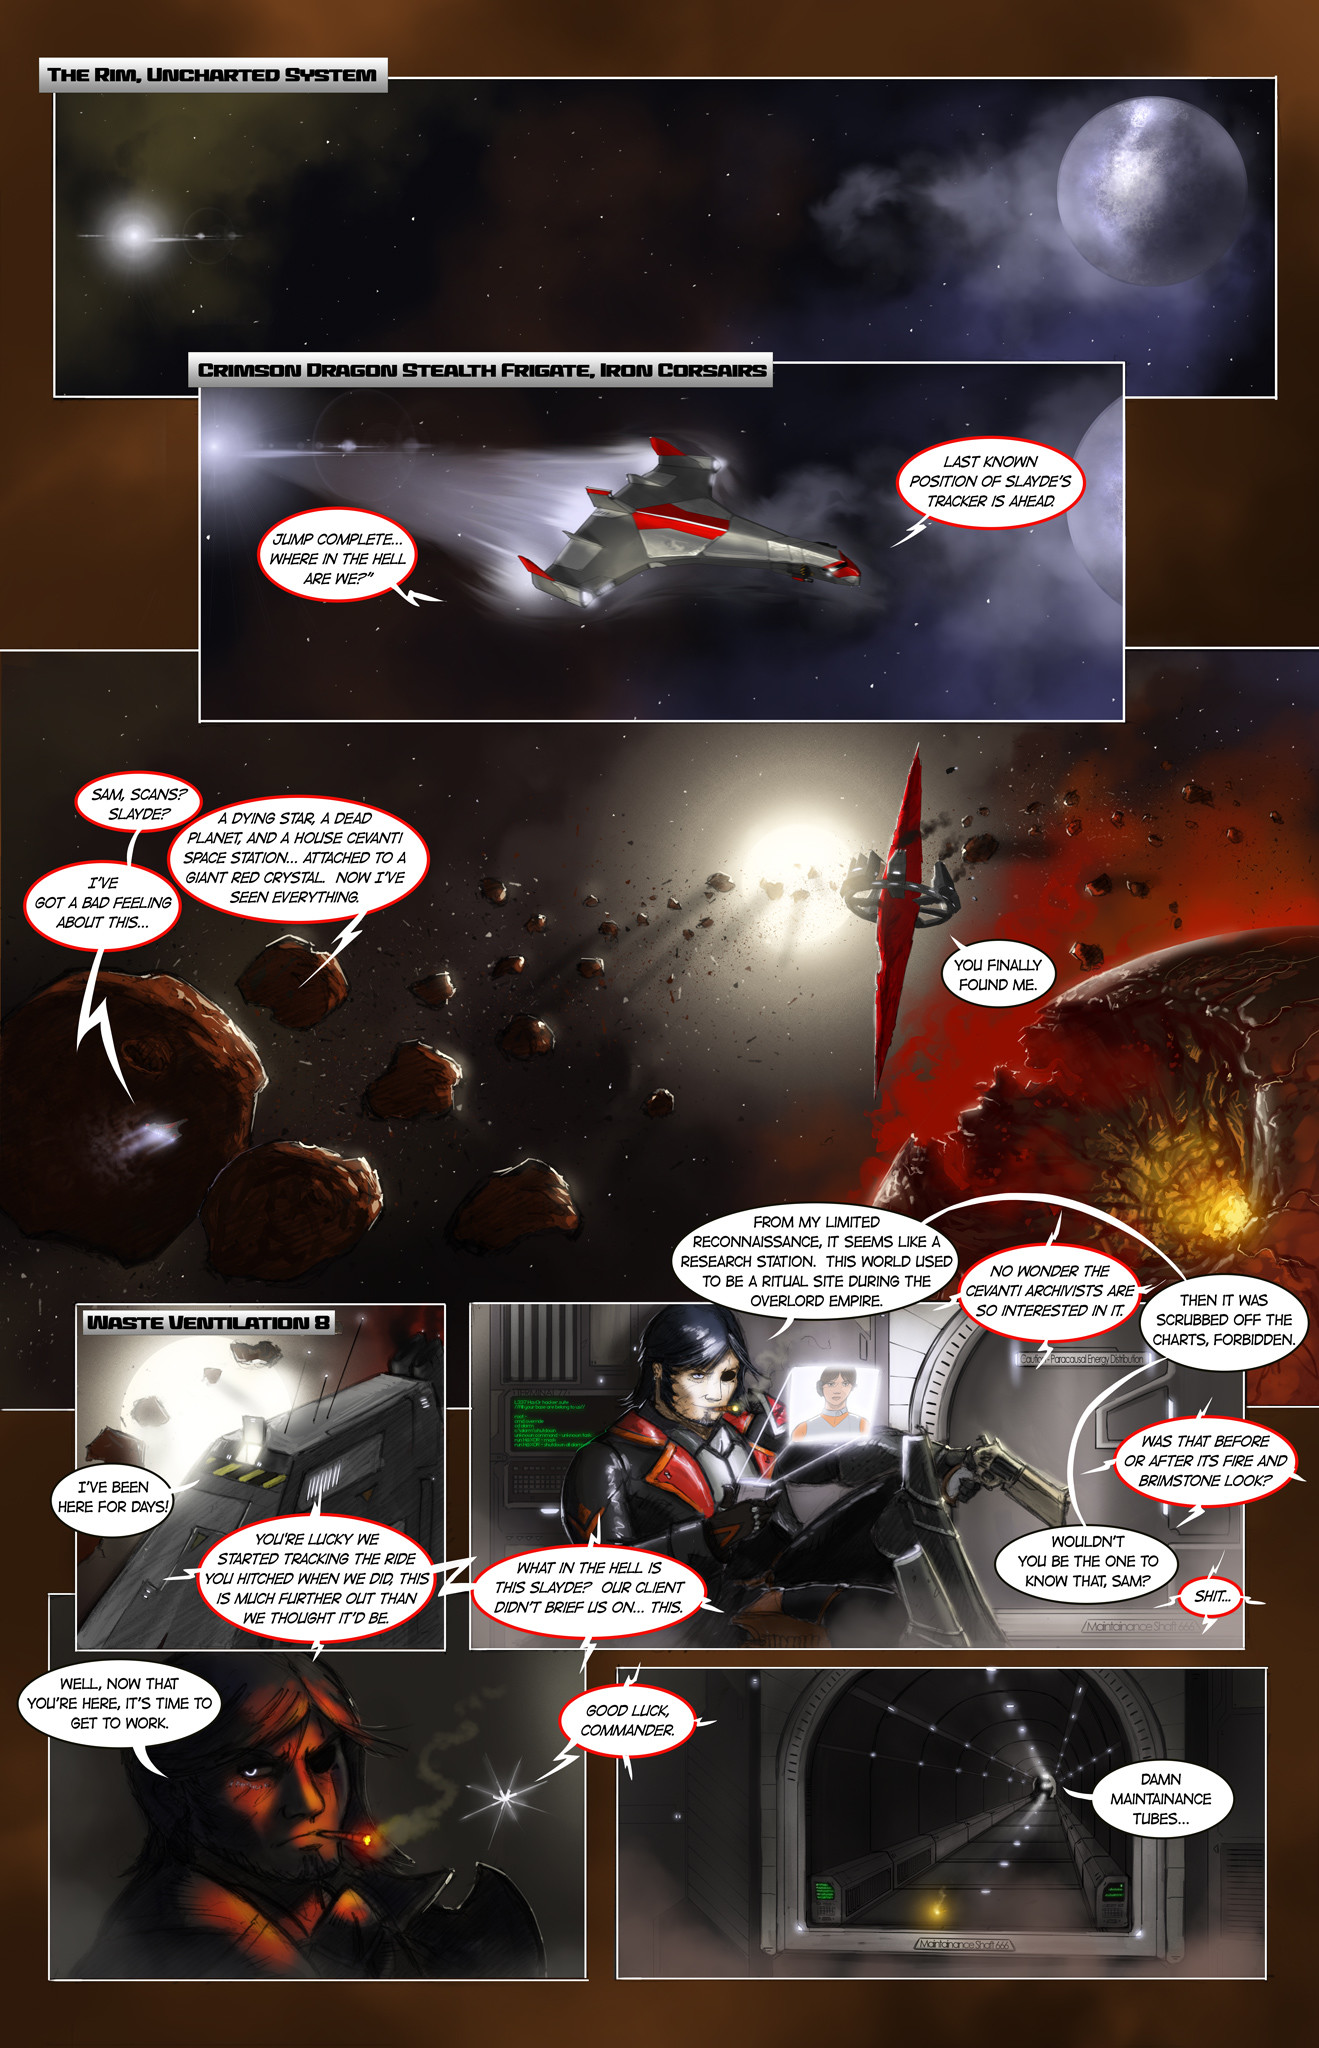 michael-rookard-chapter1-page1.jpg